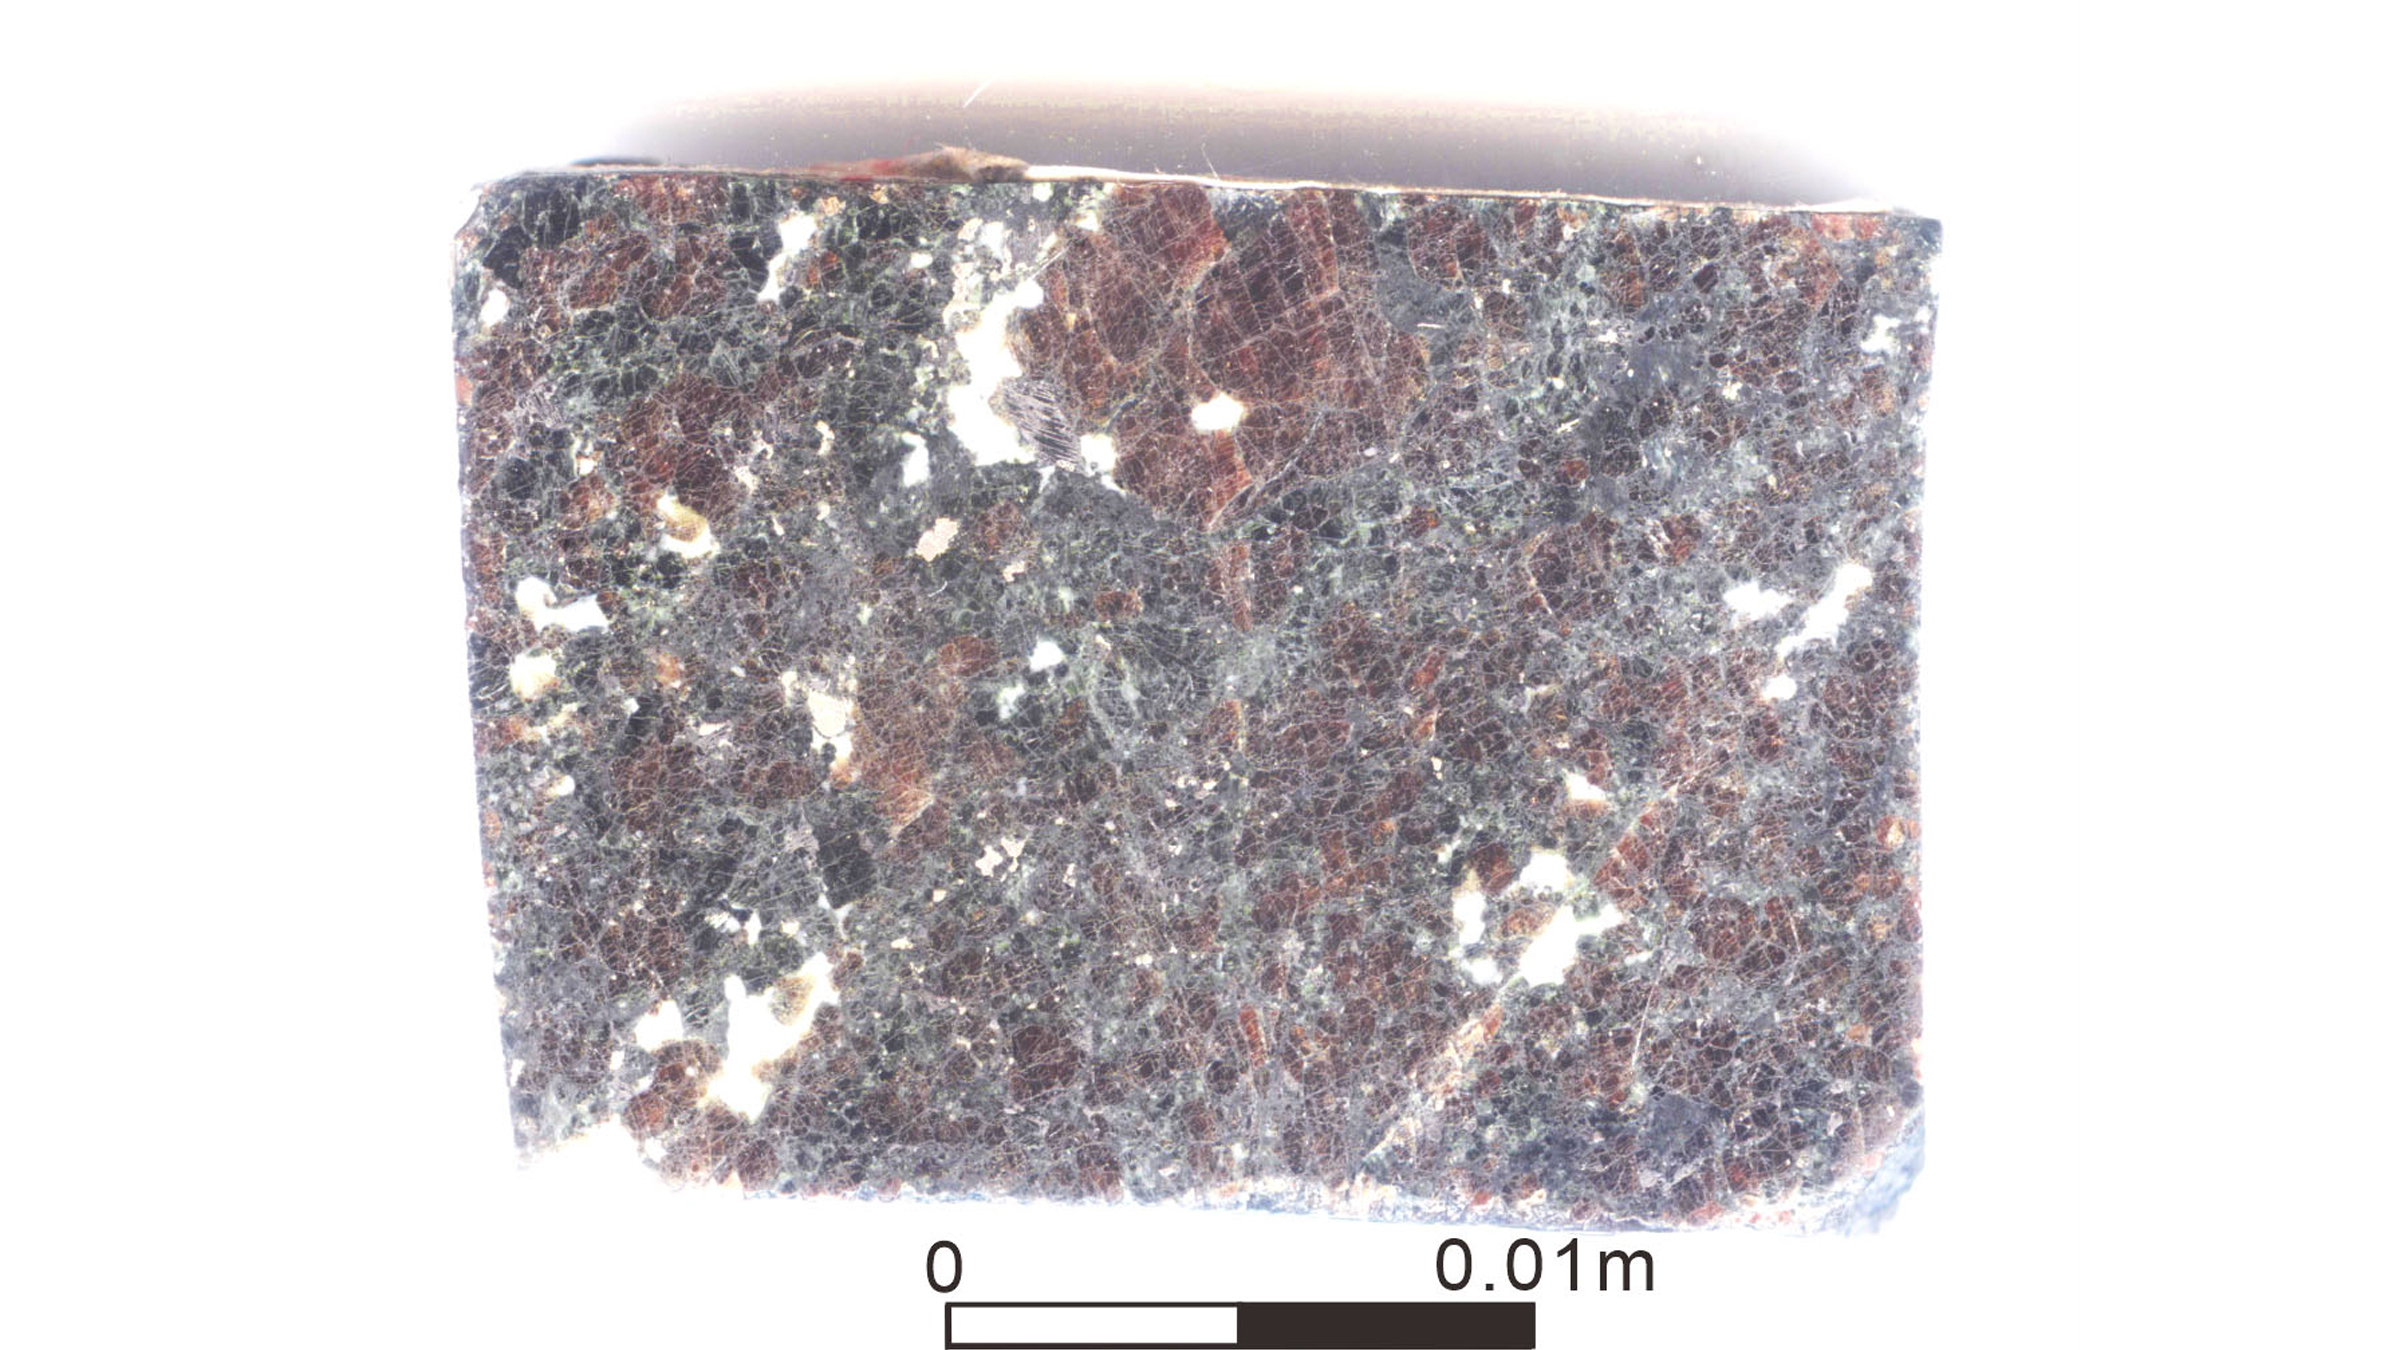 A slab of Archean eclogite with red garnet and green pyroxene from Shangying, China.